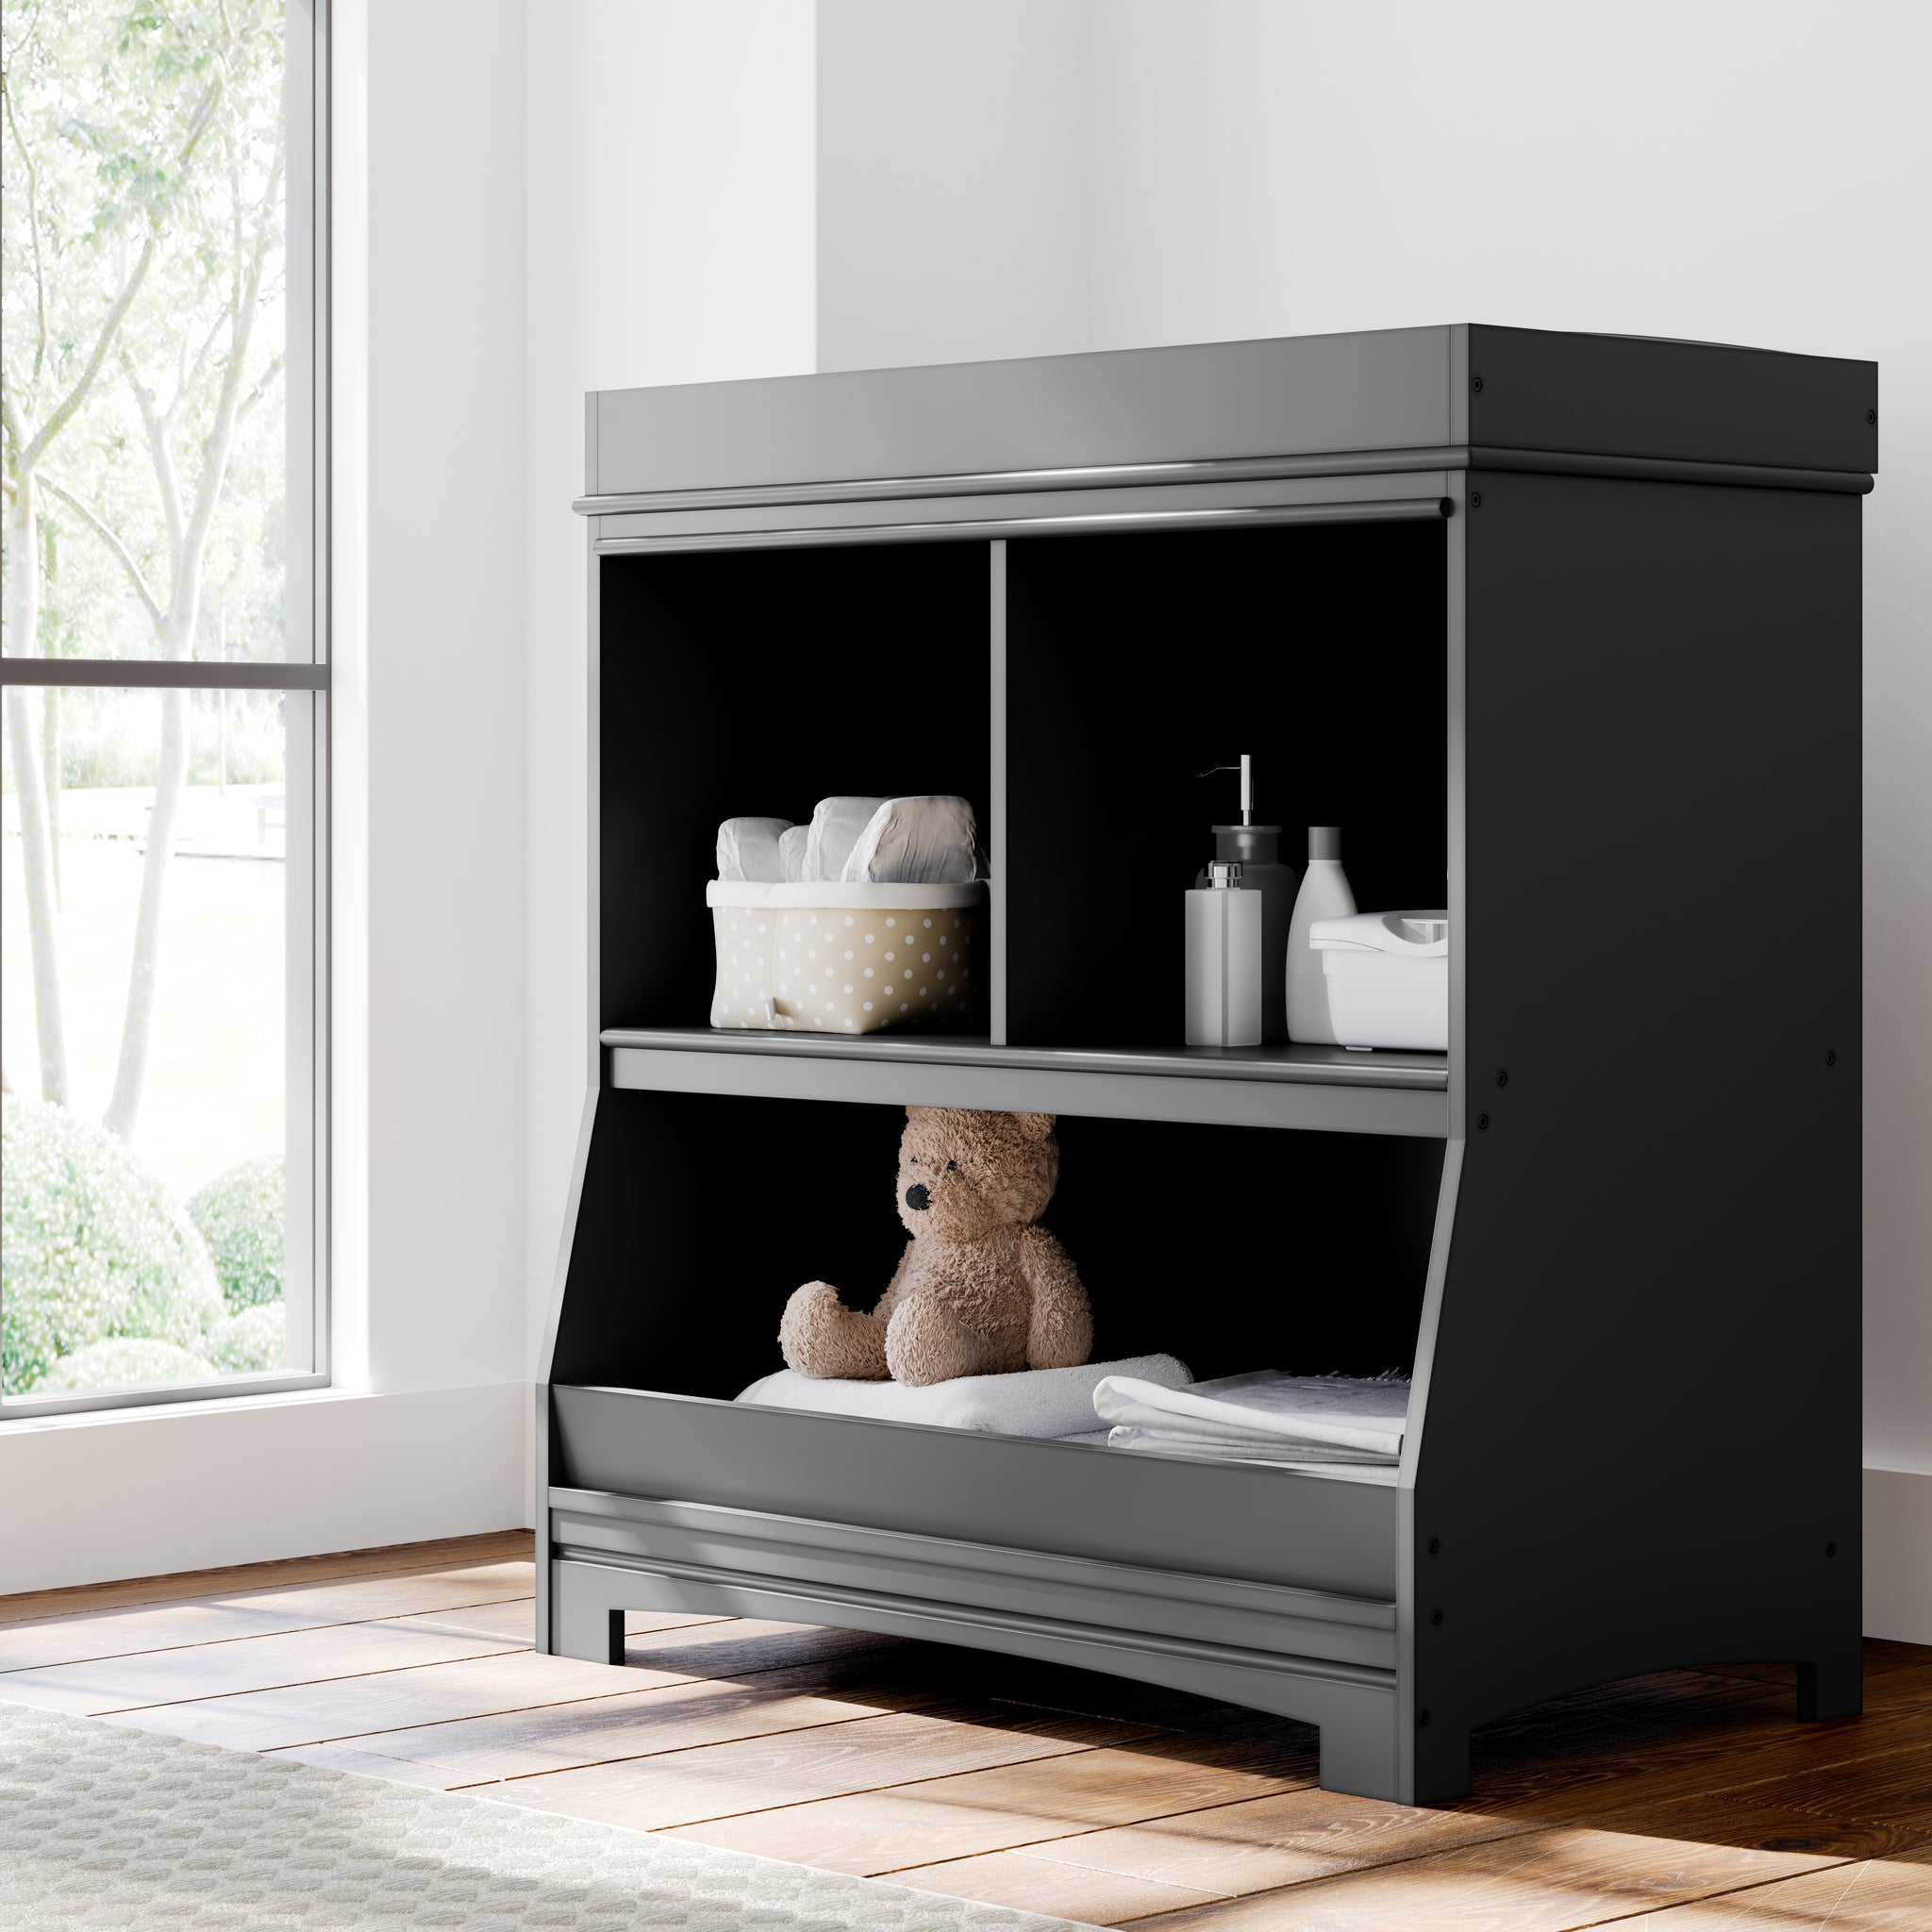 Black changing table with storage in nursery